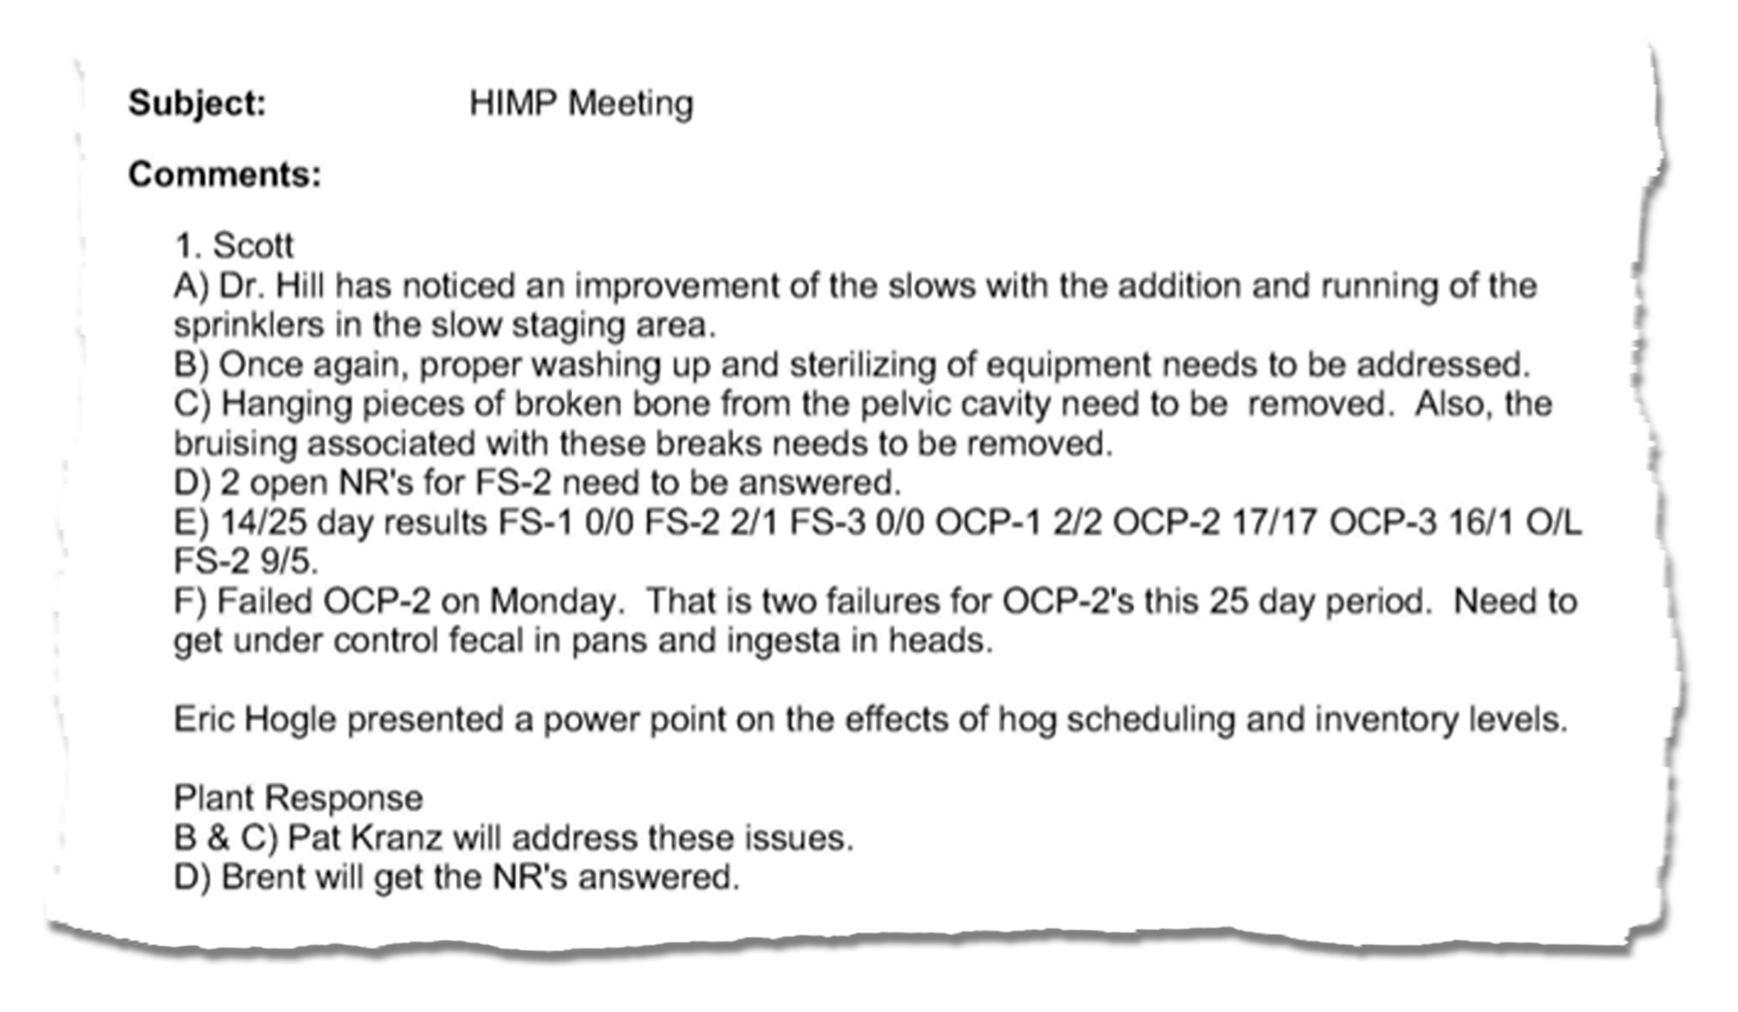 Proceedings from a meeting regarding HIMP (HACCP Inspection Models Project), including notes detailing how washing and sterilizing of equipment needs to be addressed, hanging pieces of broken bone from animal carcasses require removal, open noncompliance reports going unaddressed, and needing "to get under control fecal in pans and ingesta in heads."